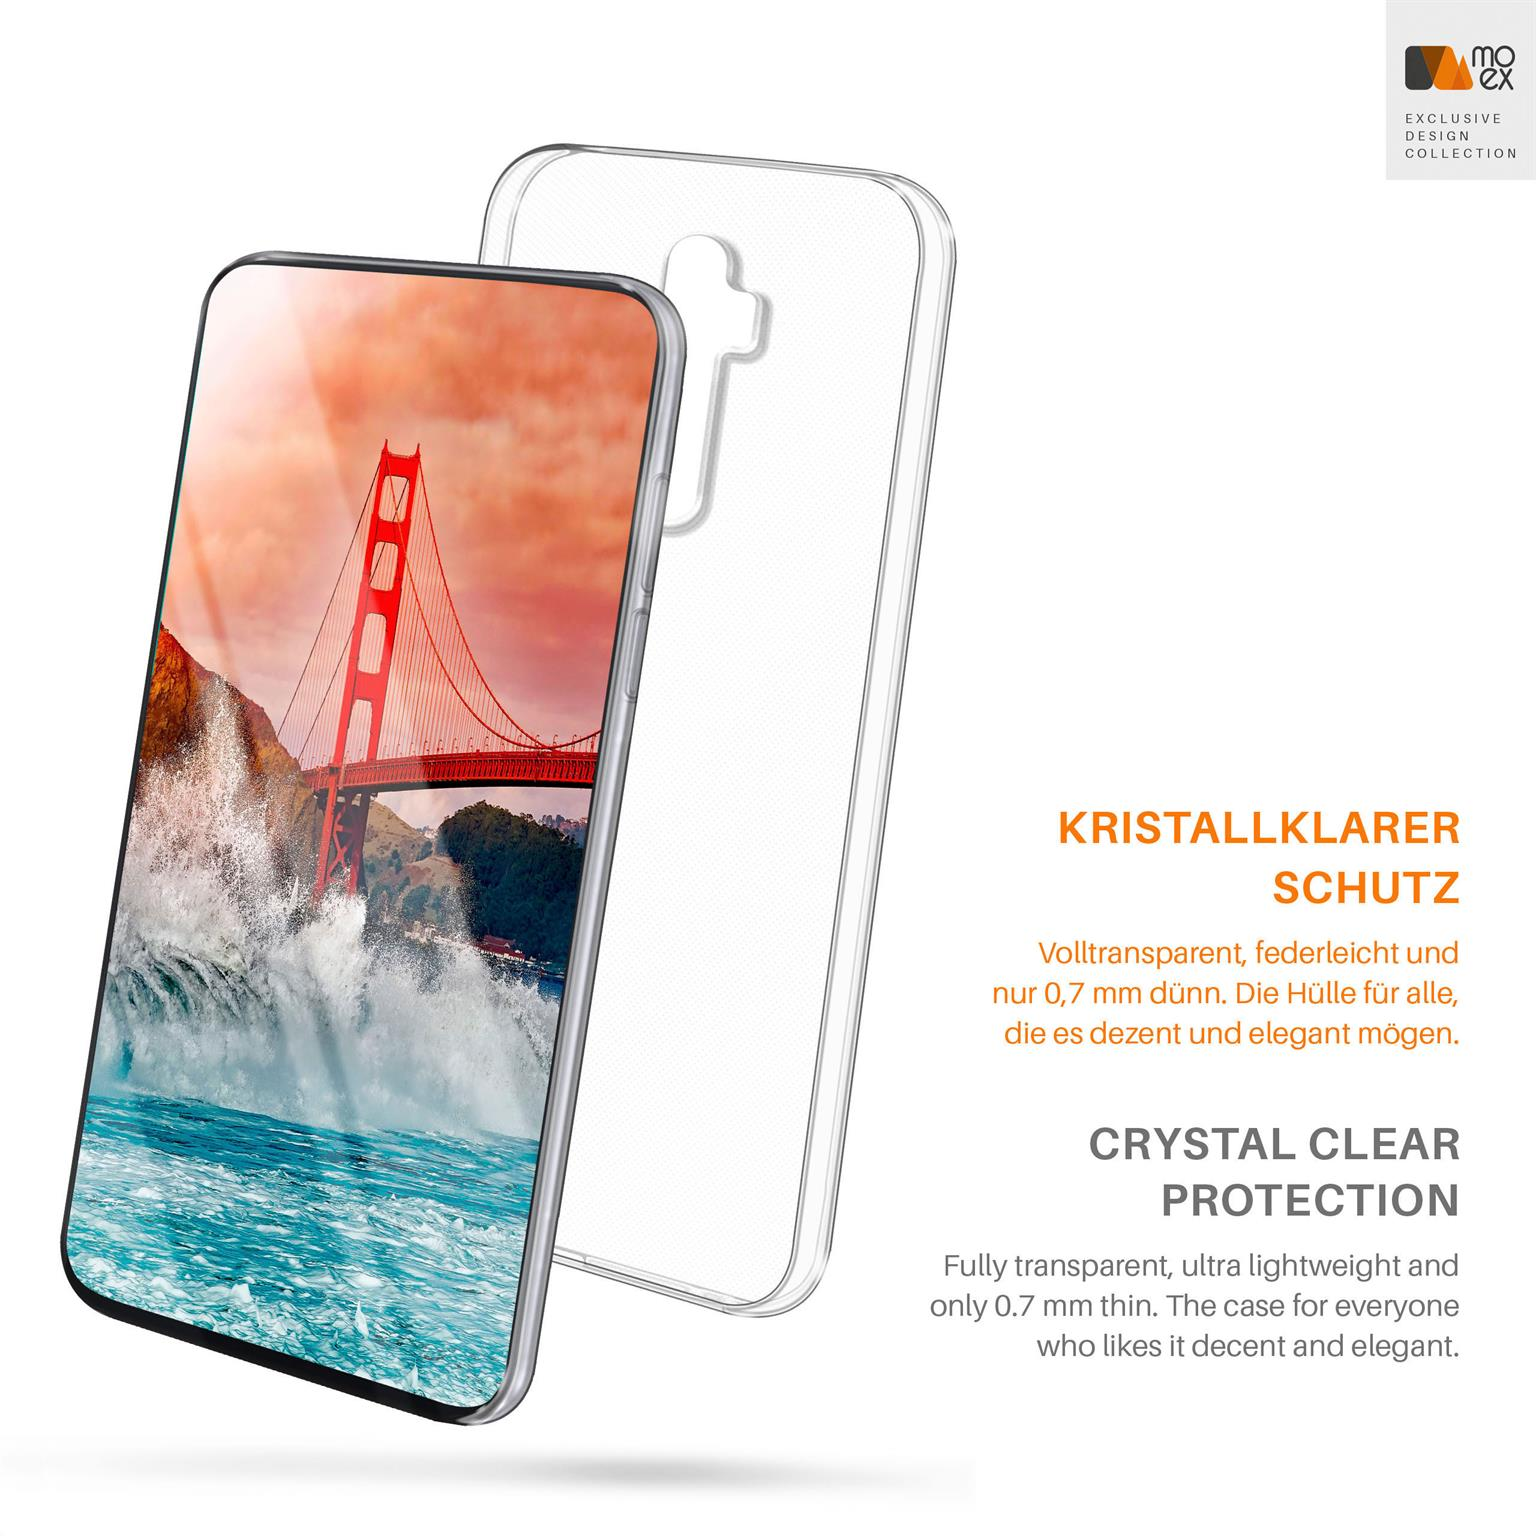 Crystal-Clear MOEX Reno2, Backcover, Oppo, Aero Case,